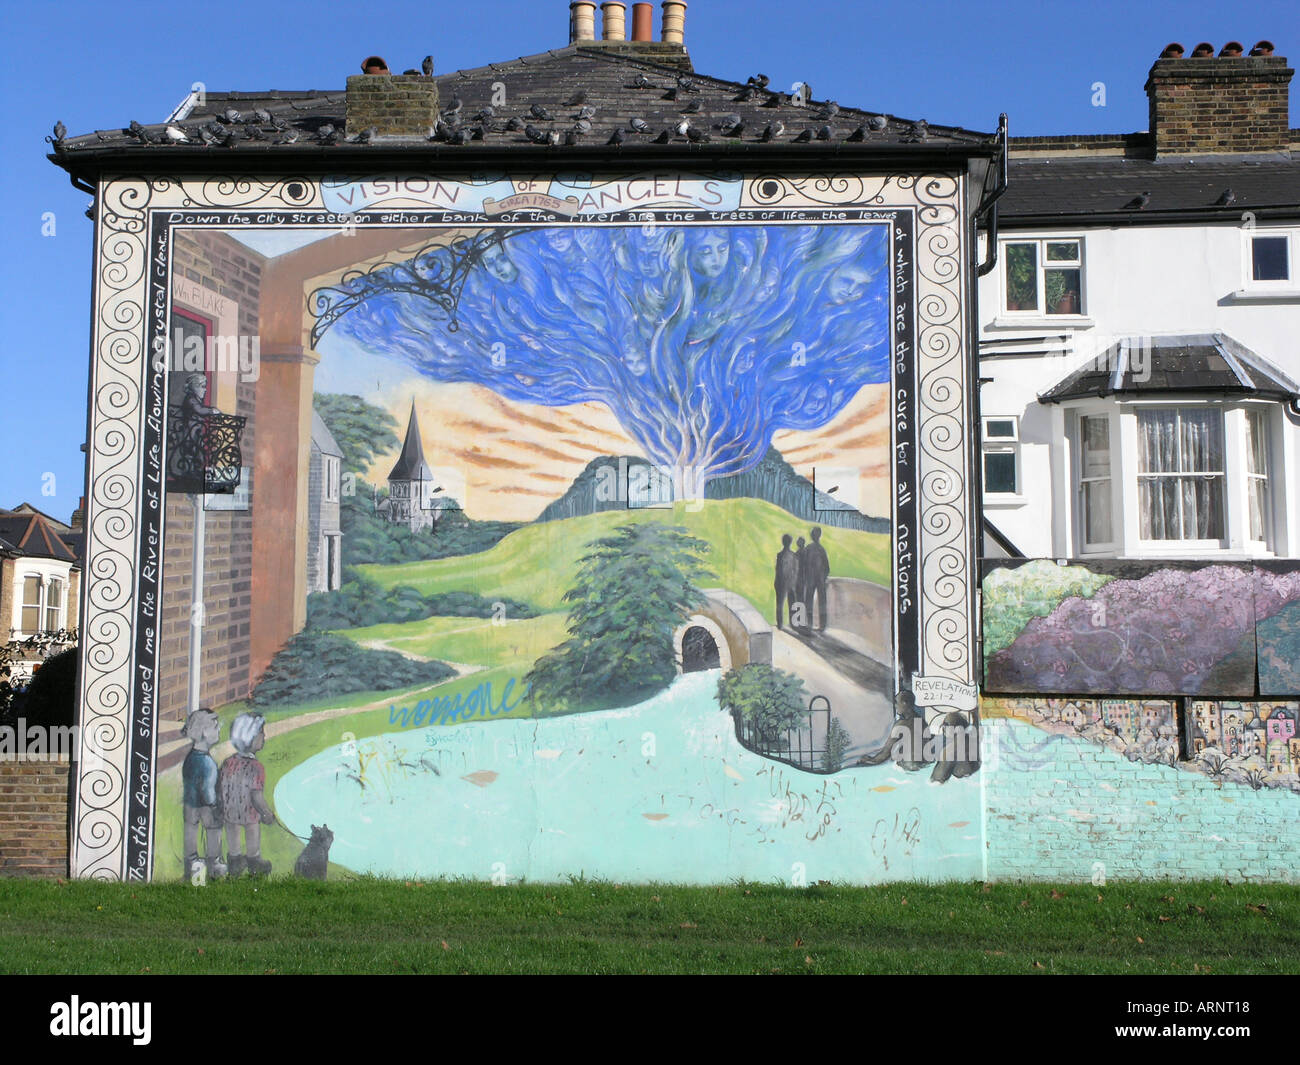 Mural commemorating William Blake who saw a vision of angels in a tree on Peckham Rye. Adys Road, Peckham, London UK Stock Photo